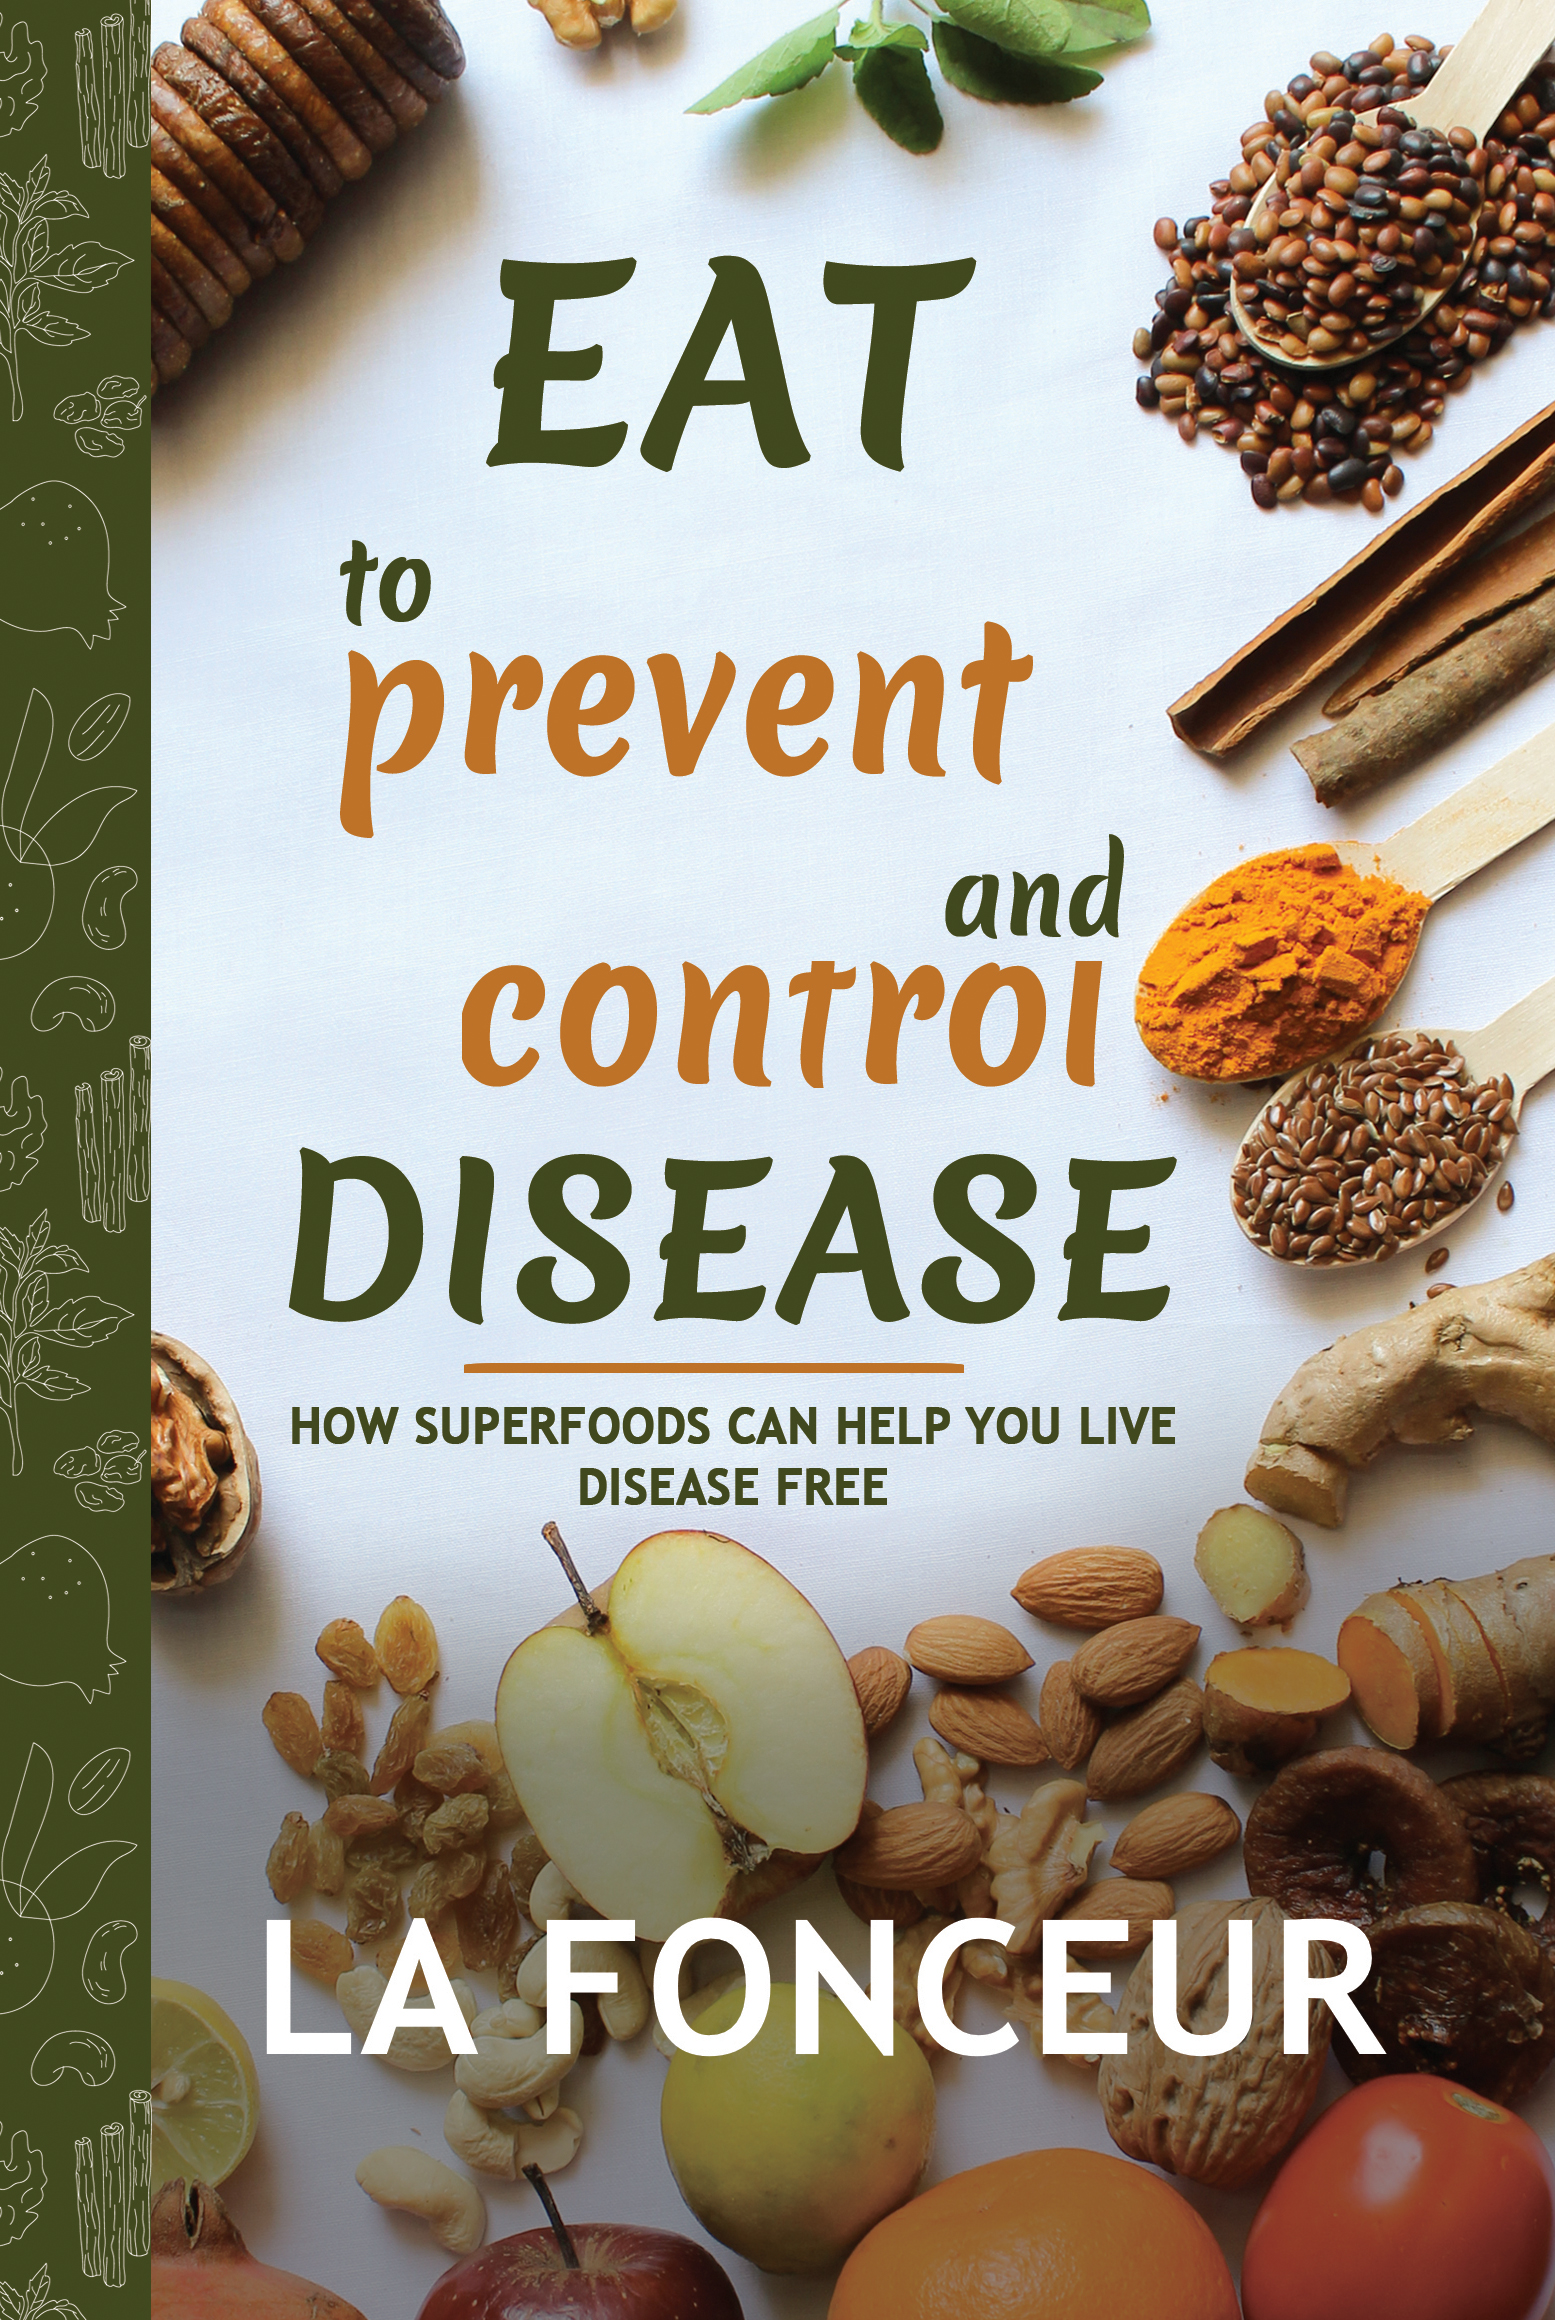 FREE: Eat to Prevent and Control Disease by La Fonceur